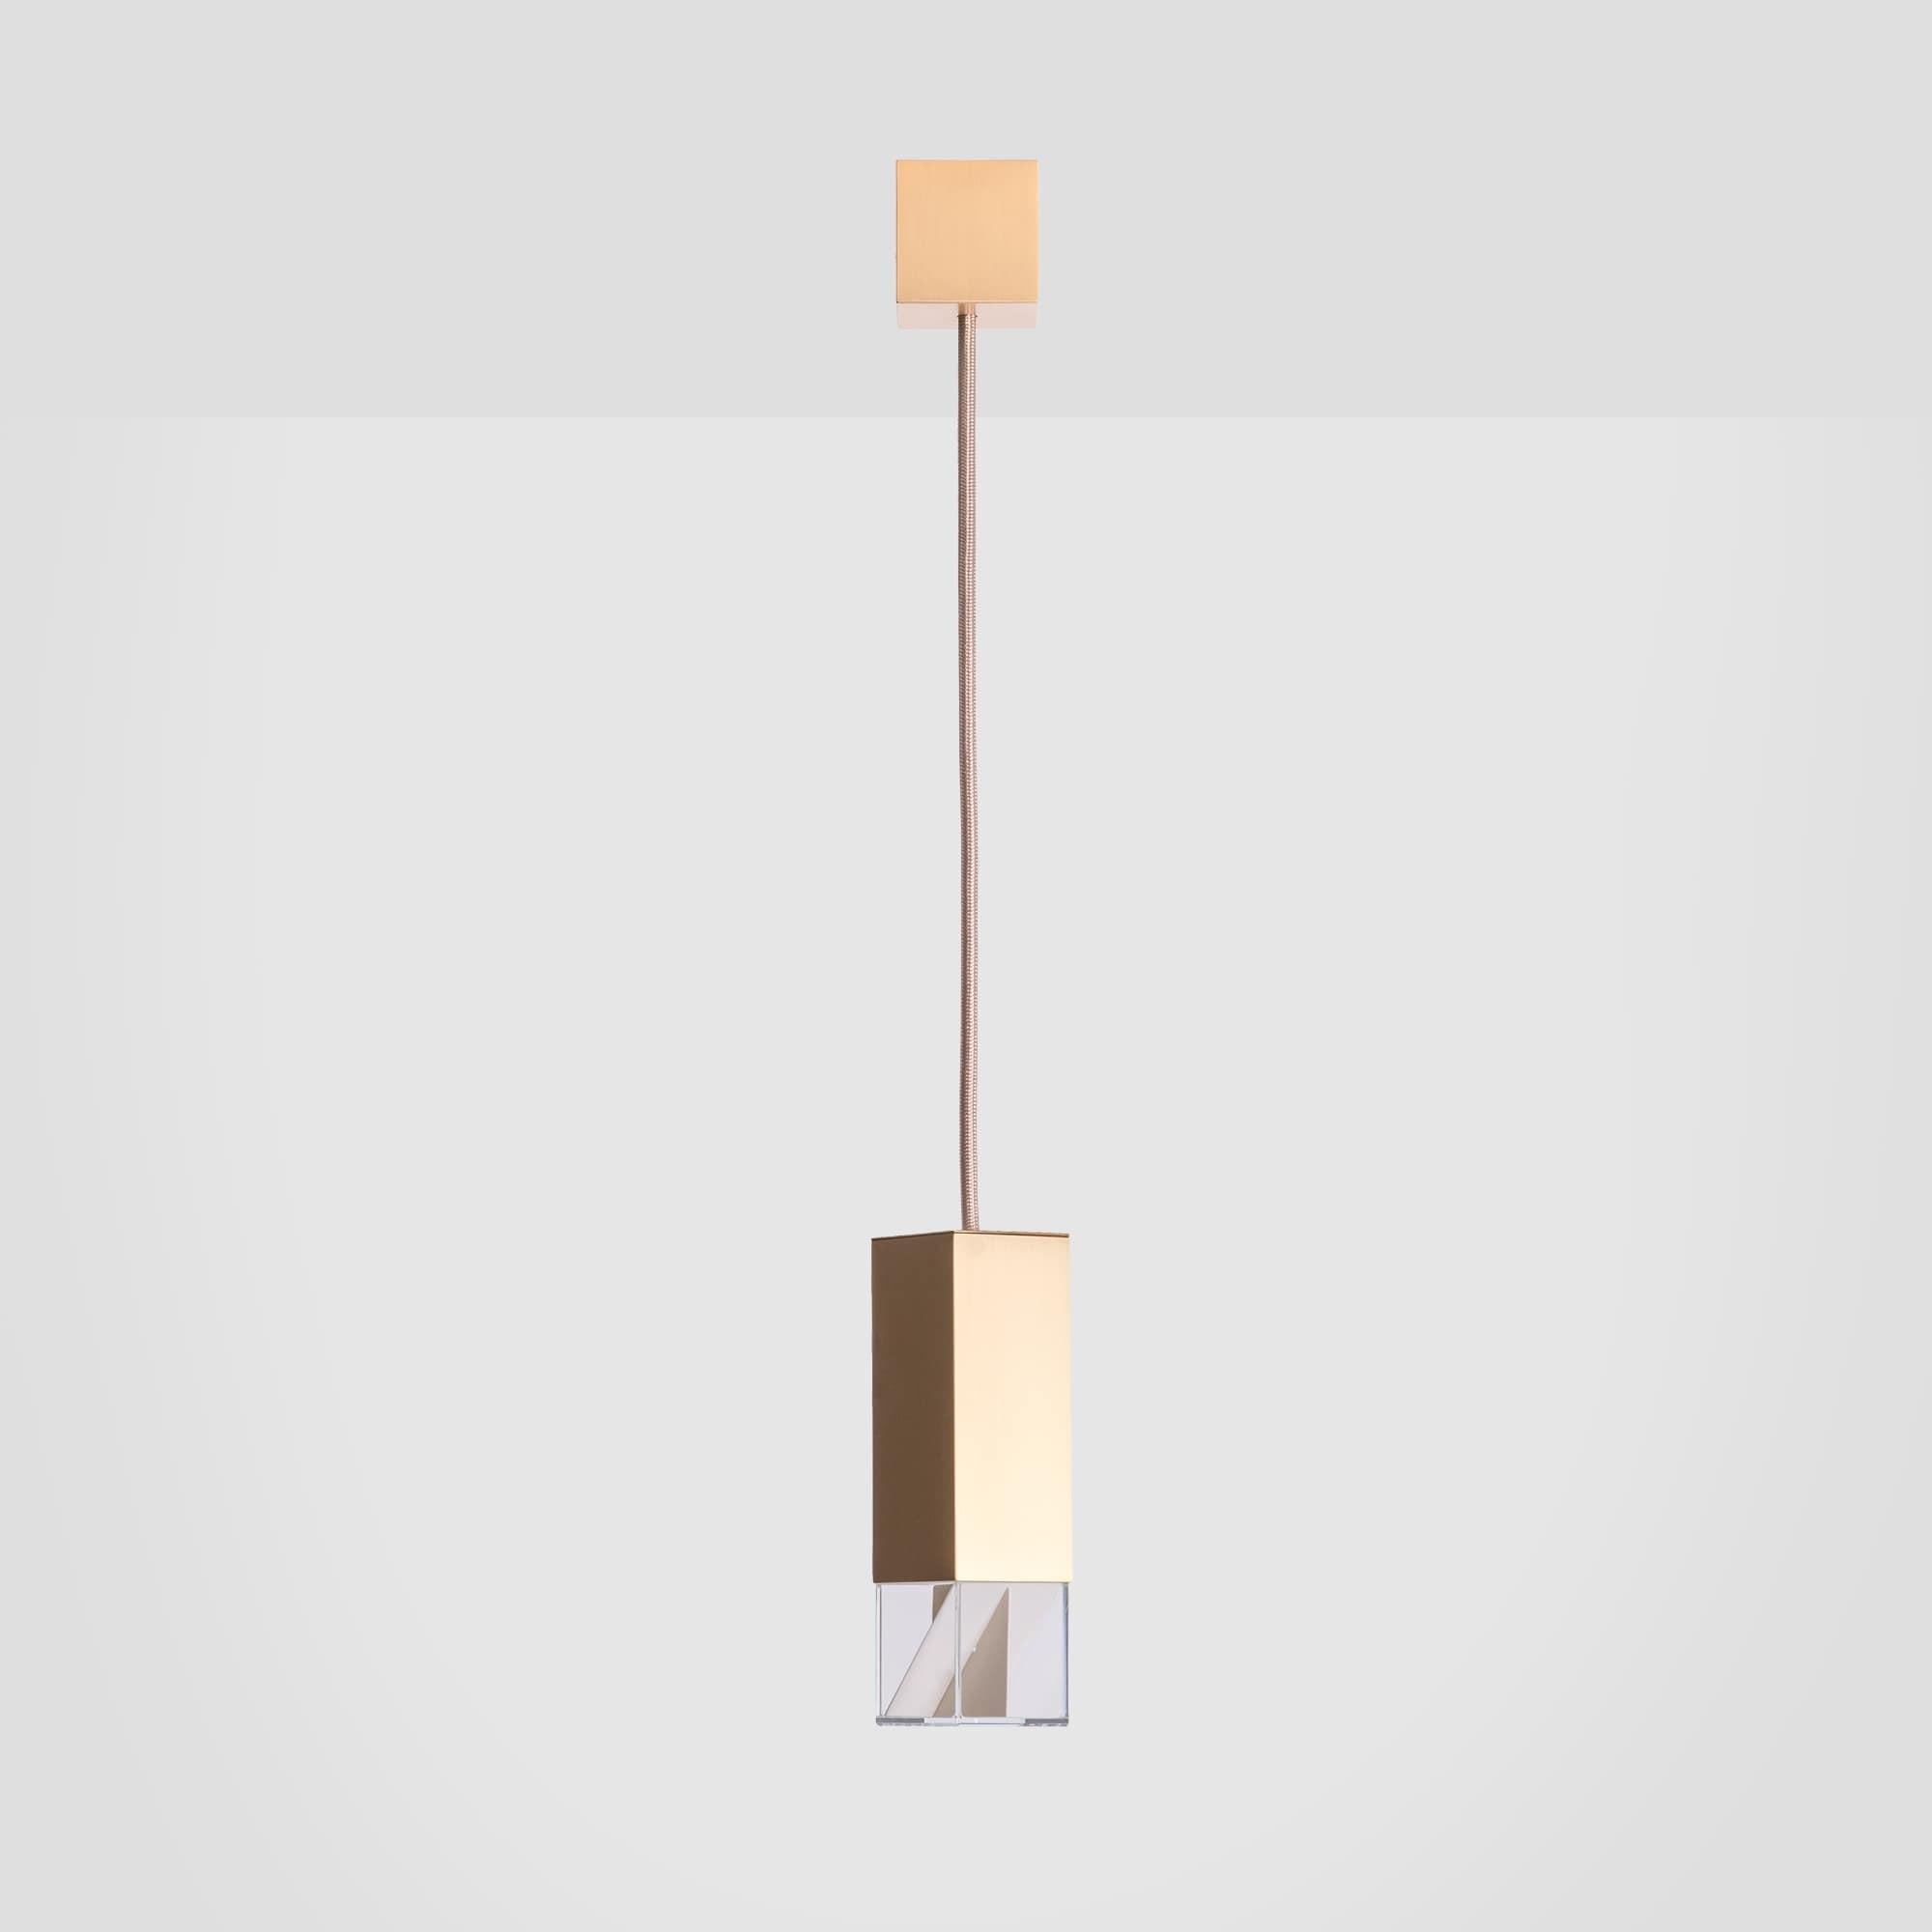 Lamp one in brass by Formaminima
Dimensions: 5 x 5 x H 17 cm
Materials: Lamp body in solid brass, satin finish

Ultra-thin anti-reflection crystal diffuser
Inside-diffuser Limoges biscuit-finish porcelain sheets
Satin brass ceiling rose H 50 x